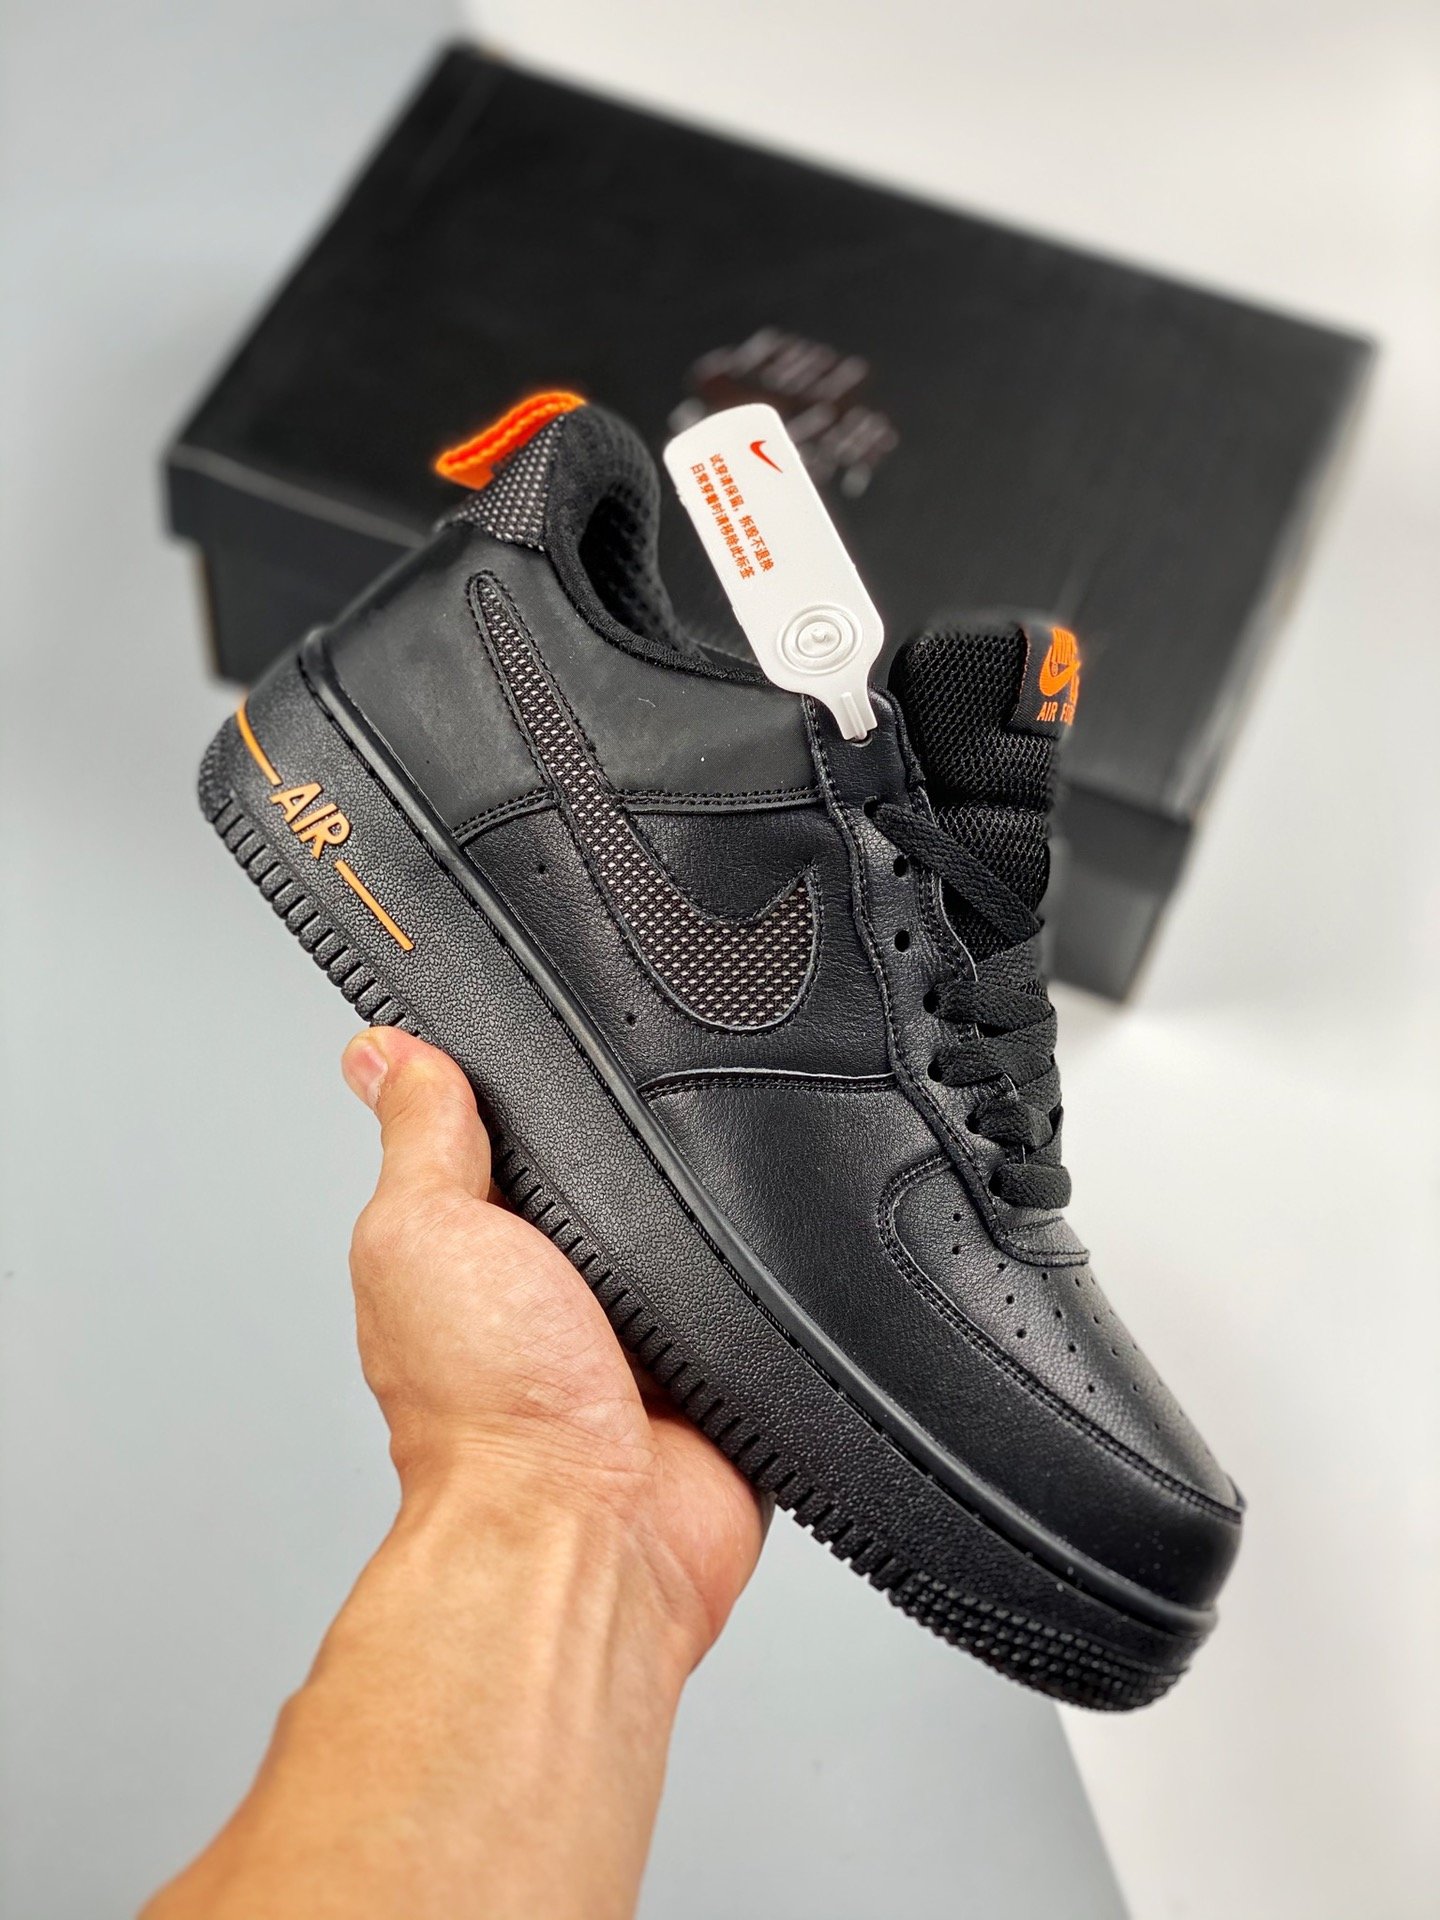 Nike Air AF Force 1 Low "Cut-Out" Black DC1429-002 Shoes